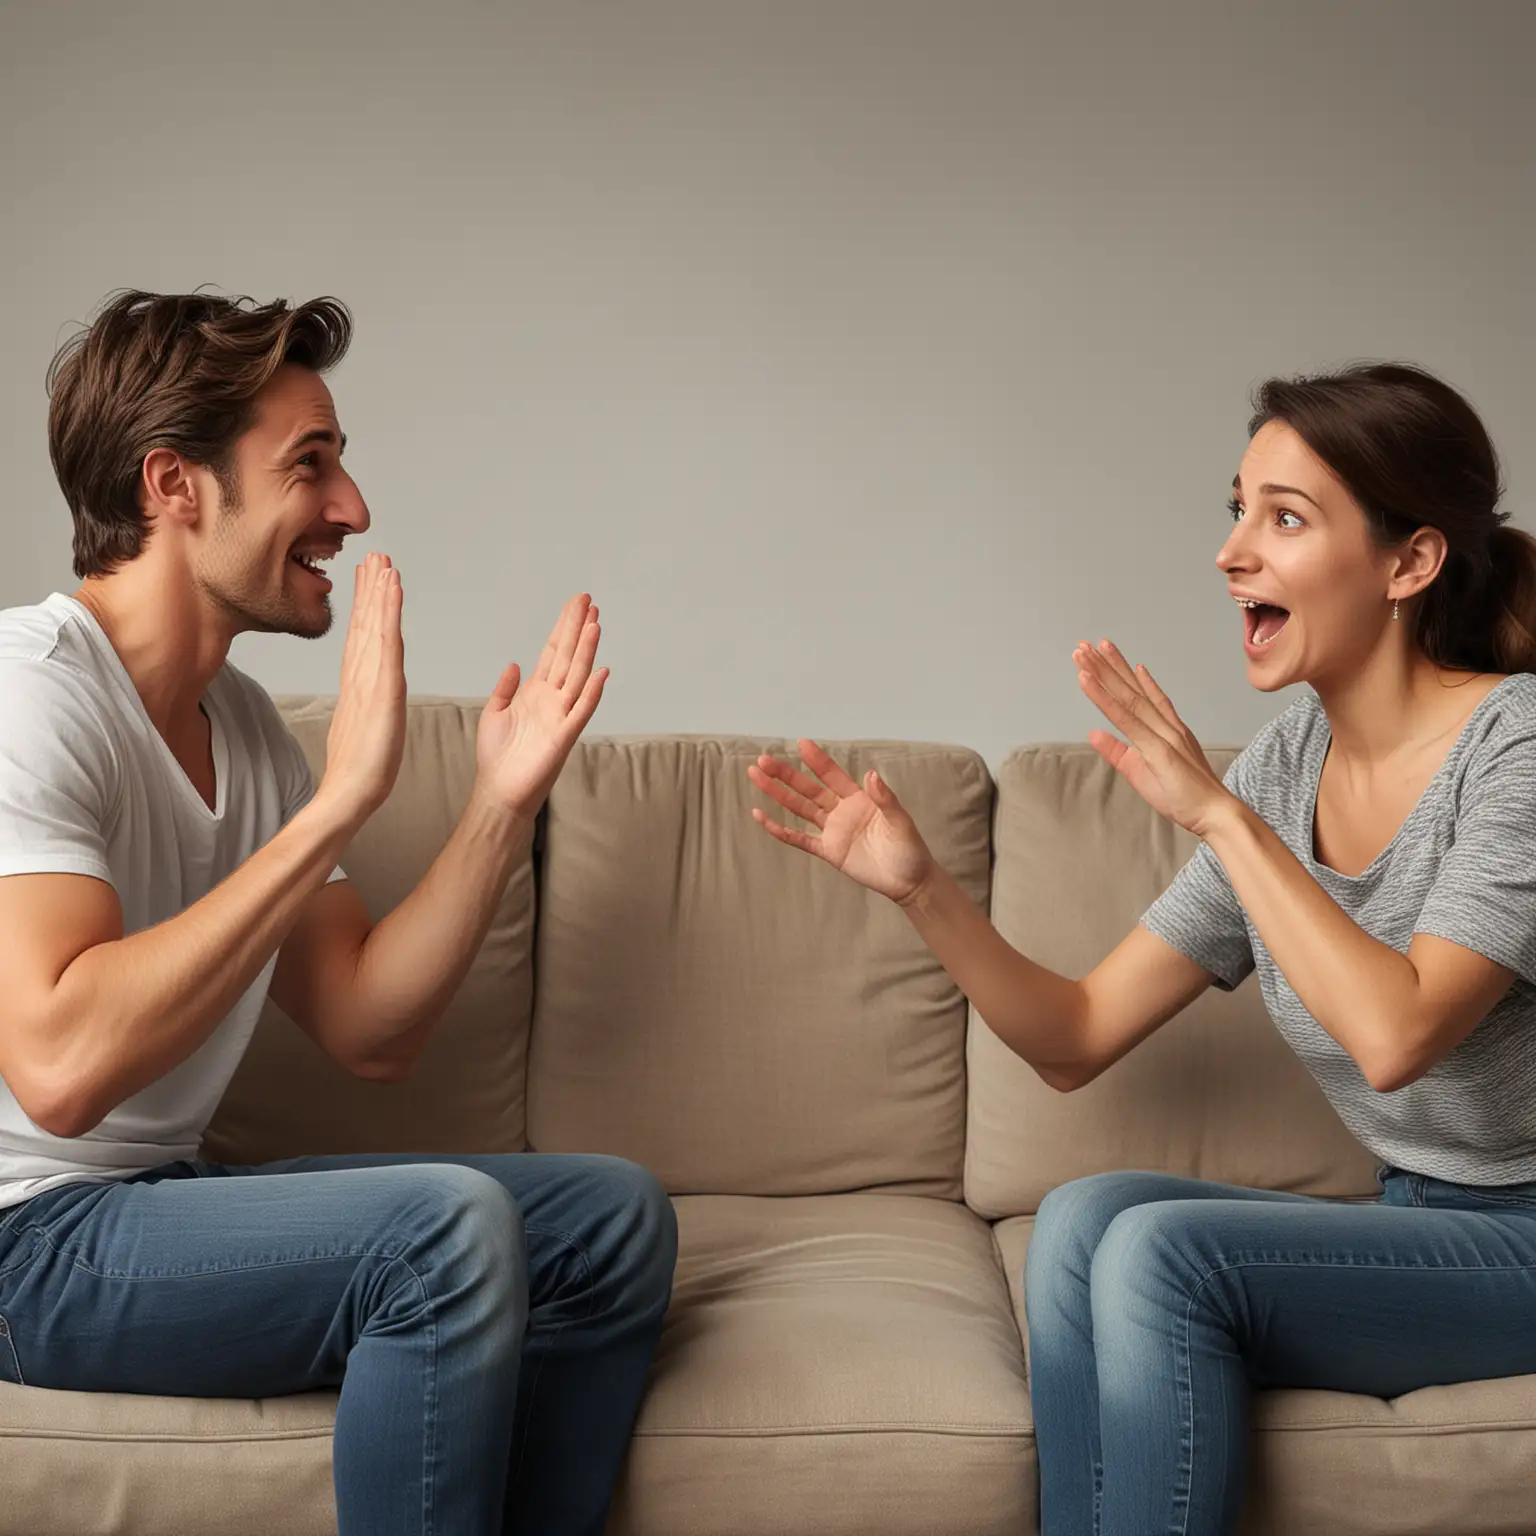 "A detailed and realistic image capturing a moment of deep conversation between a couple. One partner is gesturing with their hands, showing emotion, while the other is closely observing these gestures and facial expressions, indicating an understanding beyond words. The setting should be intimate, perhaps on a living room couch, to emphasize closeness."